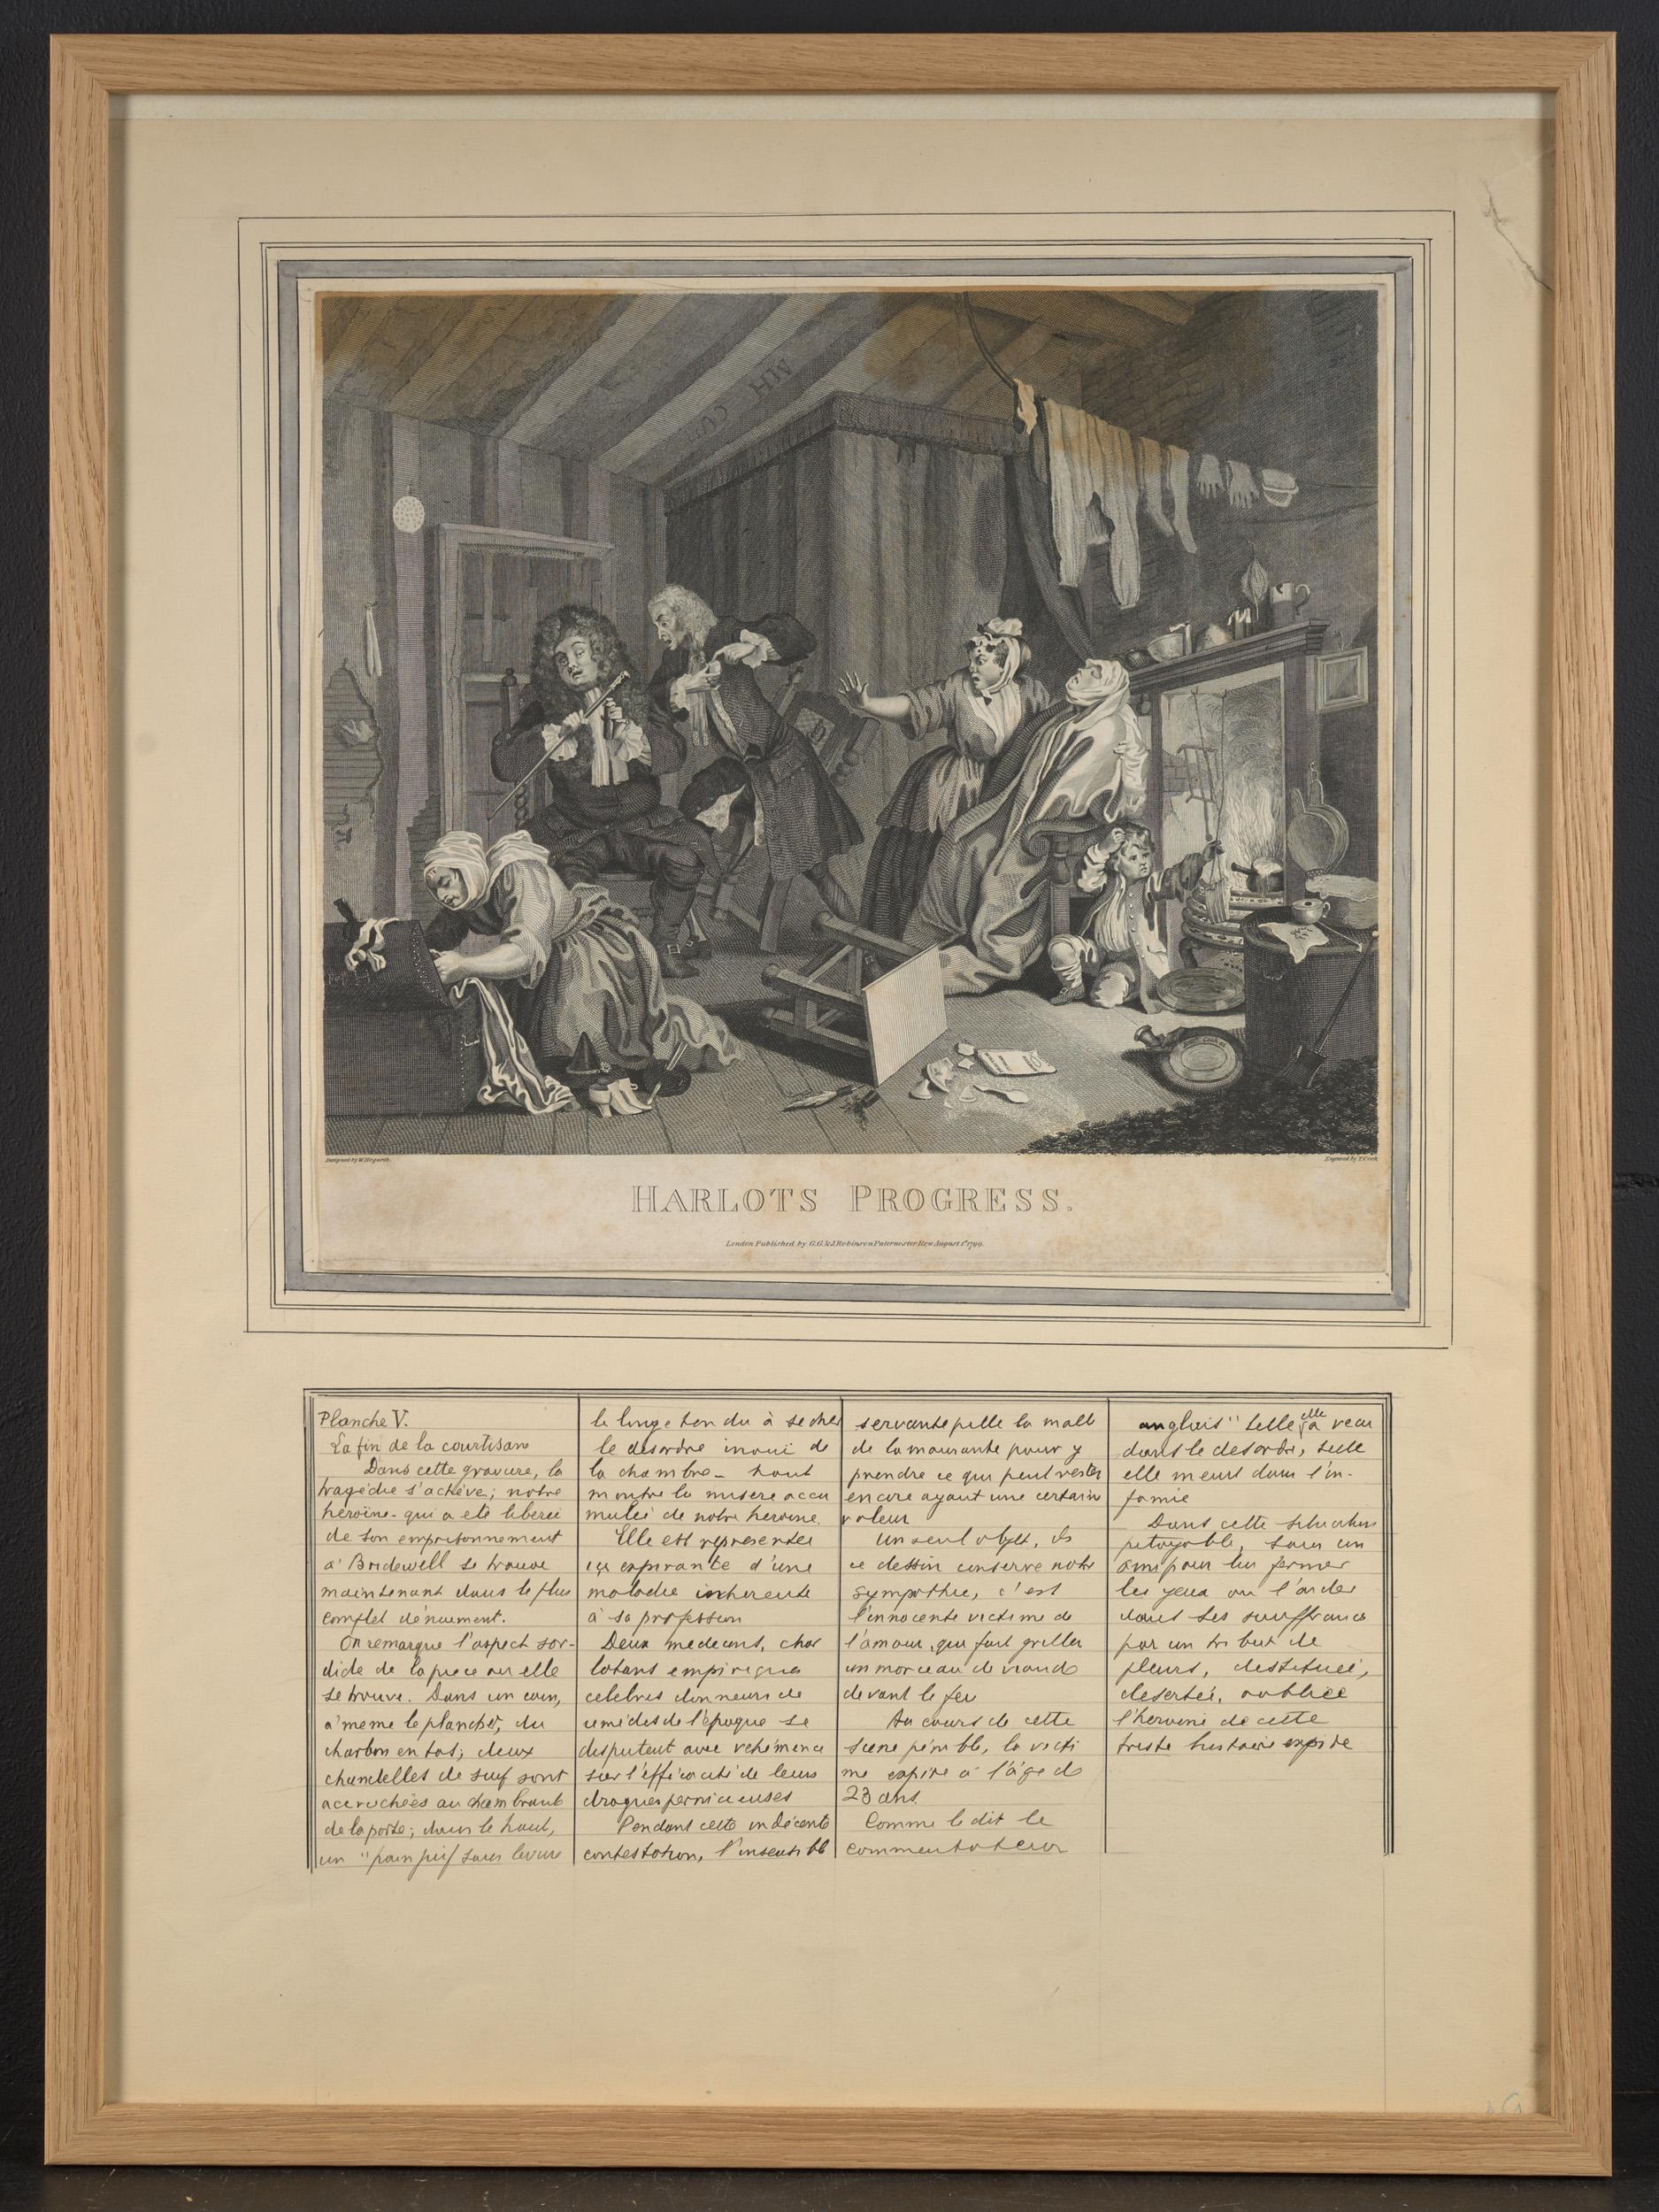 william hogarth used his print the harlot's progress to do what